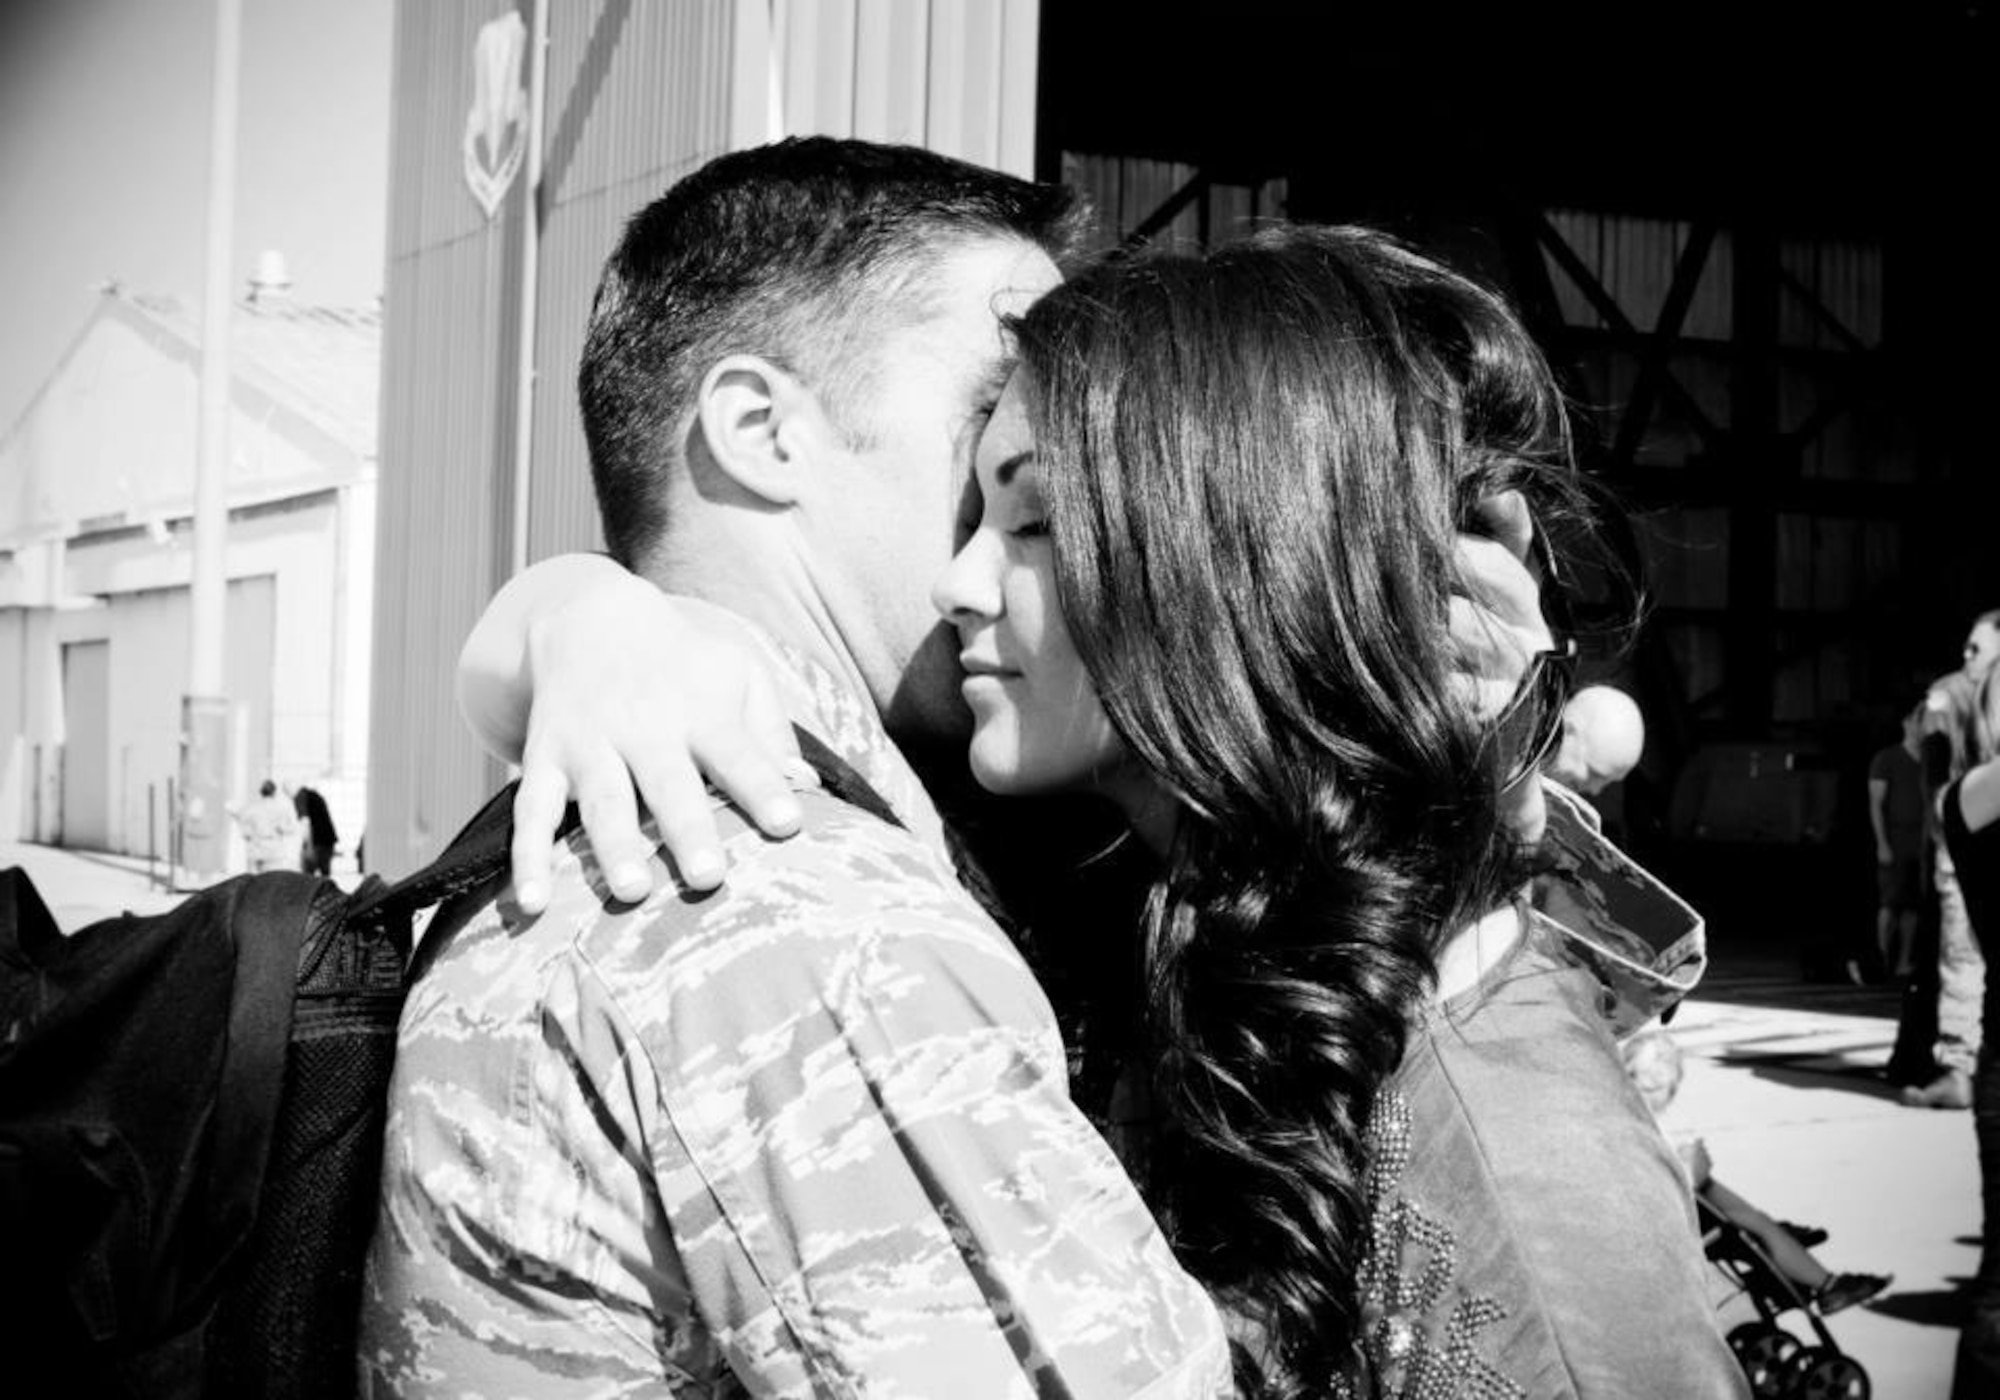 U.S. Air Force Capt. Benjamin Griffith, 606th Air Control Squadron alpha flight commander from Bartlett, Tenn., and his wife Christina hug at a military event. The couple has been together for more than four years. (Courtesy photo/Released)